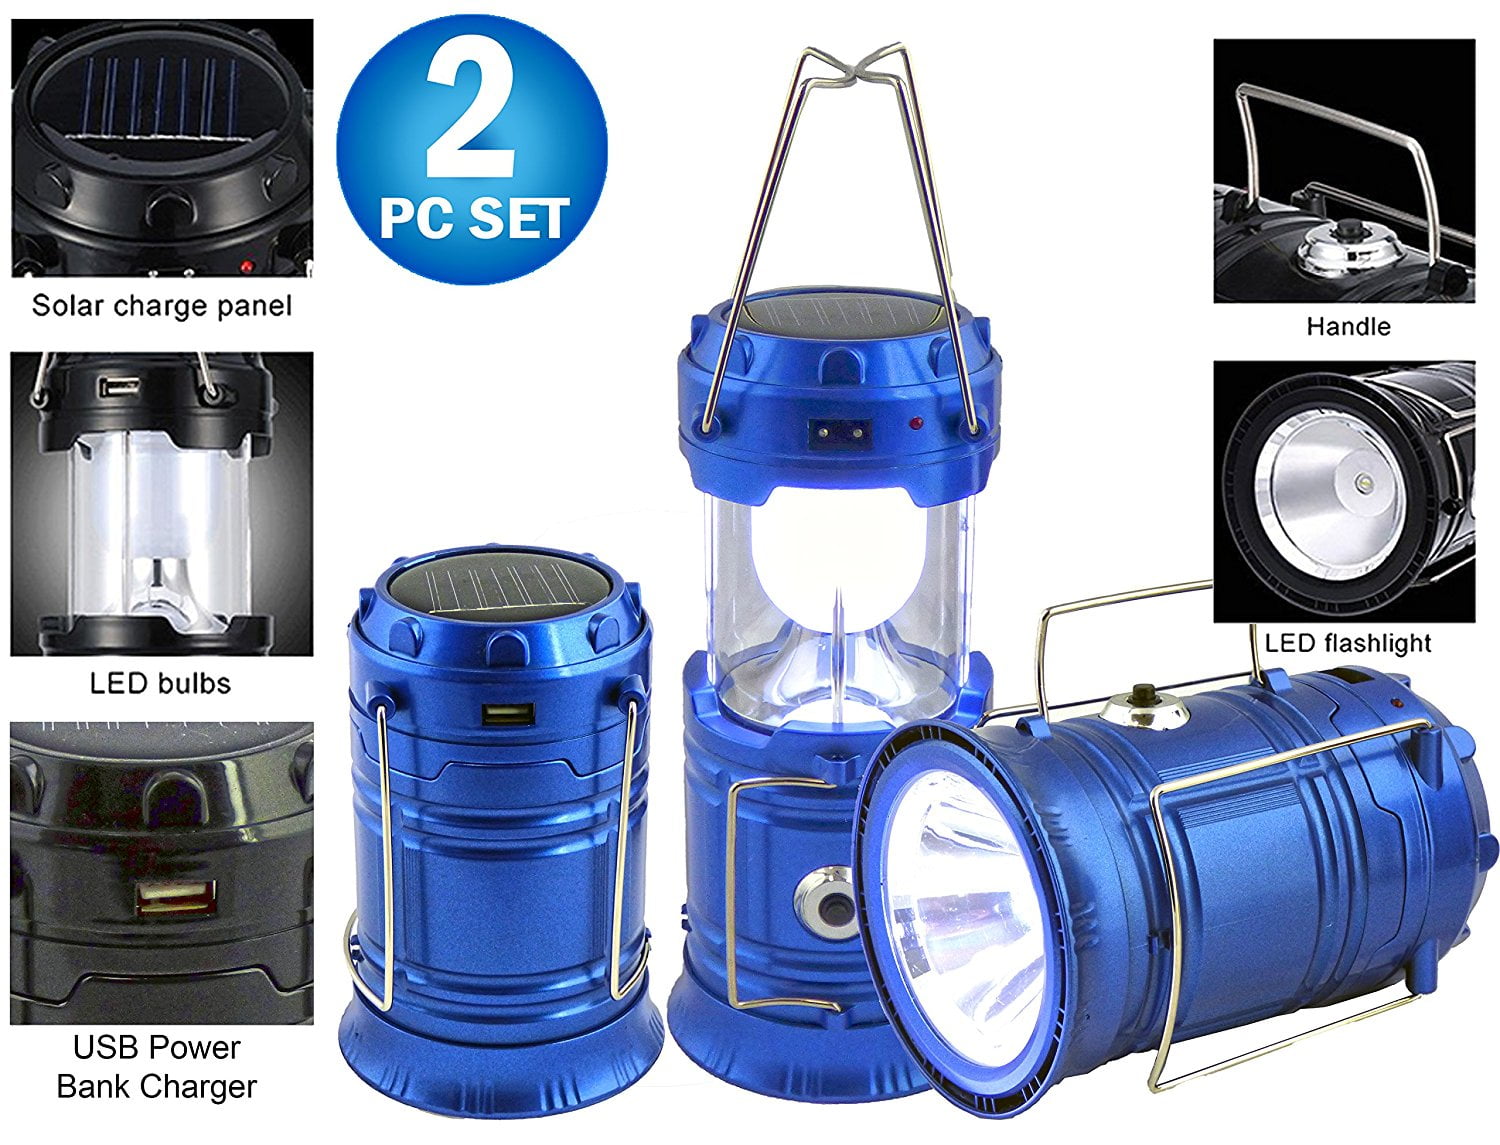 Large Solar Lantern Powered LED Light & Fan - 6 in 1 Portable Collapsible  Rechargeable Camping Lamp W/ Fan, Charging Station & Battery Backup Indoor